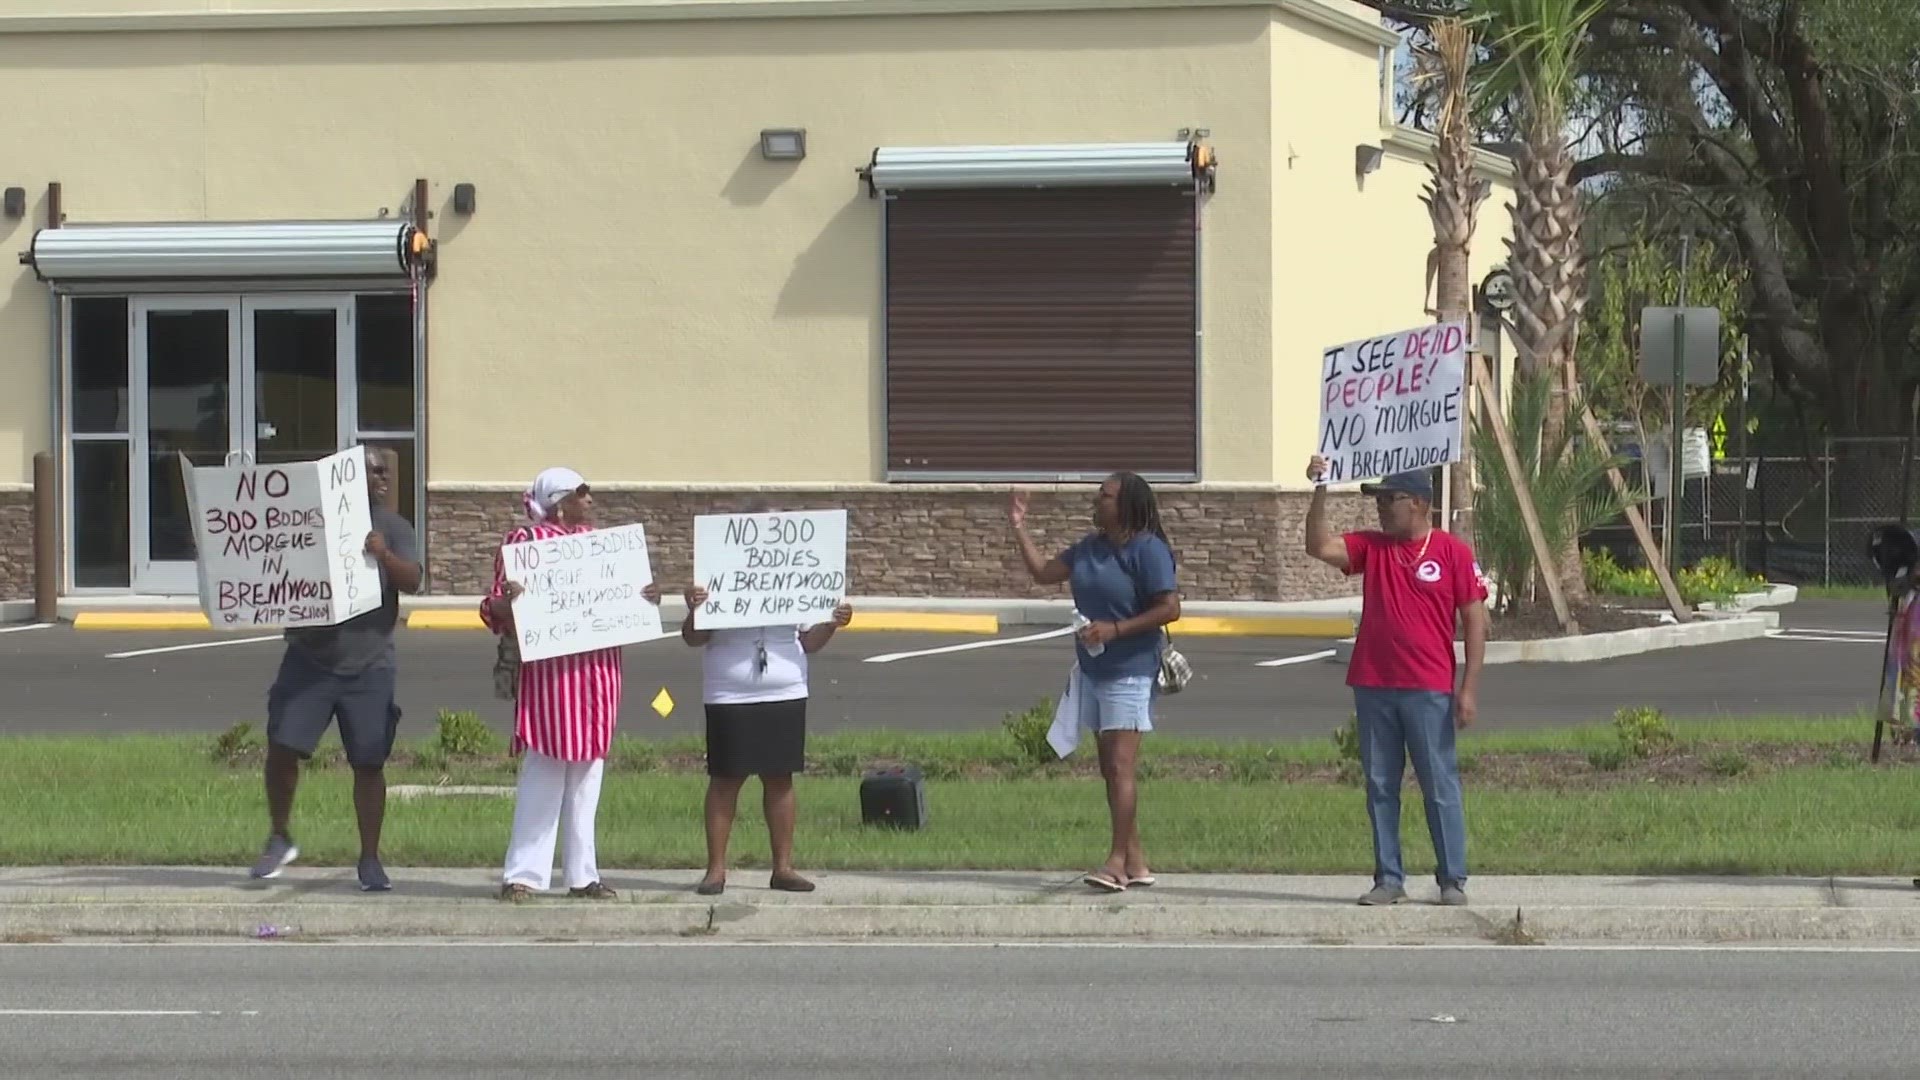 Residents in the Brentwood neighborhood are protesting the construction of a medical examiner's office and morgue on Golfair Boulevard Saturday afternoon.